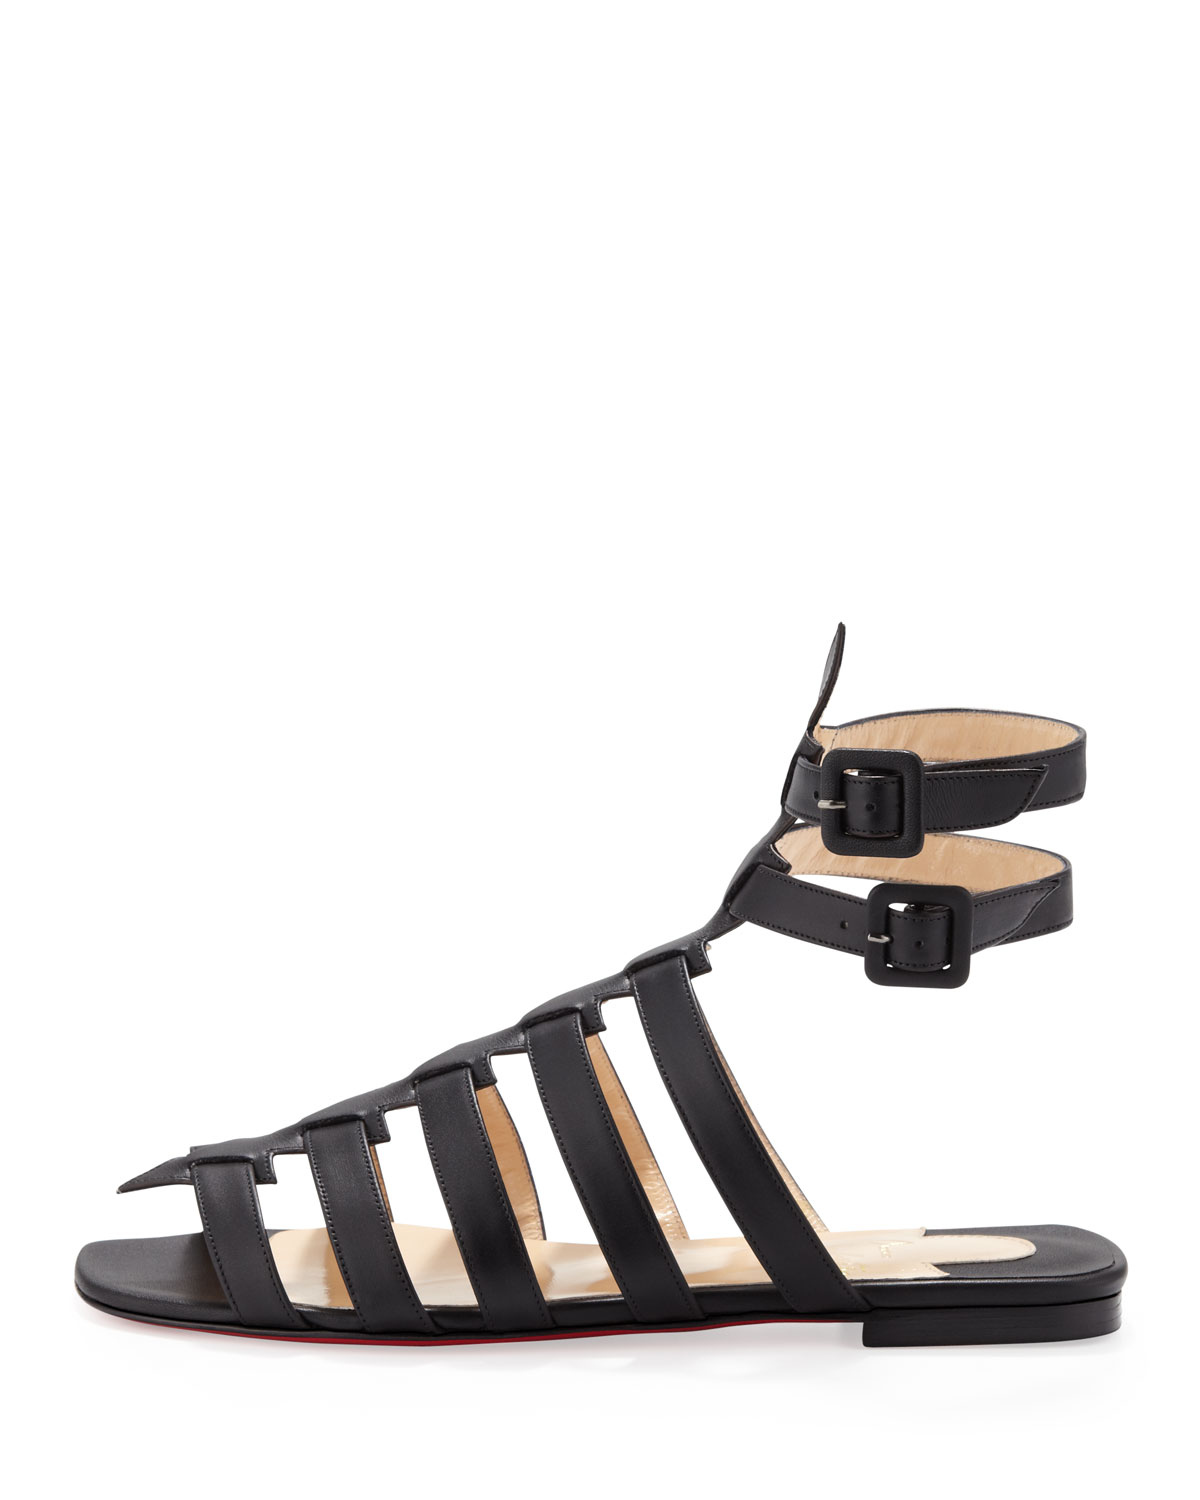 christian louboutin caged sandals Black suede | cosmetics digital ...